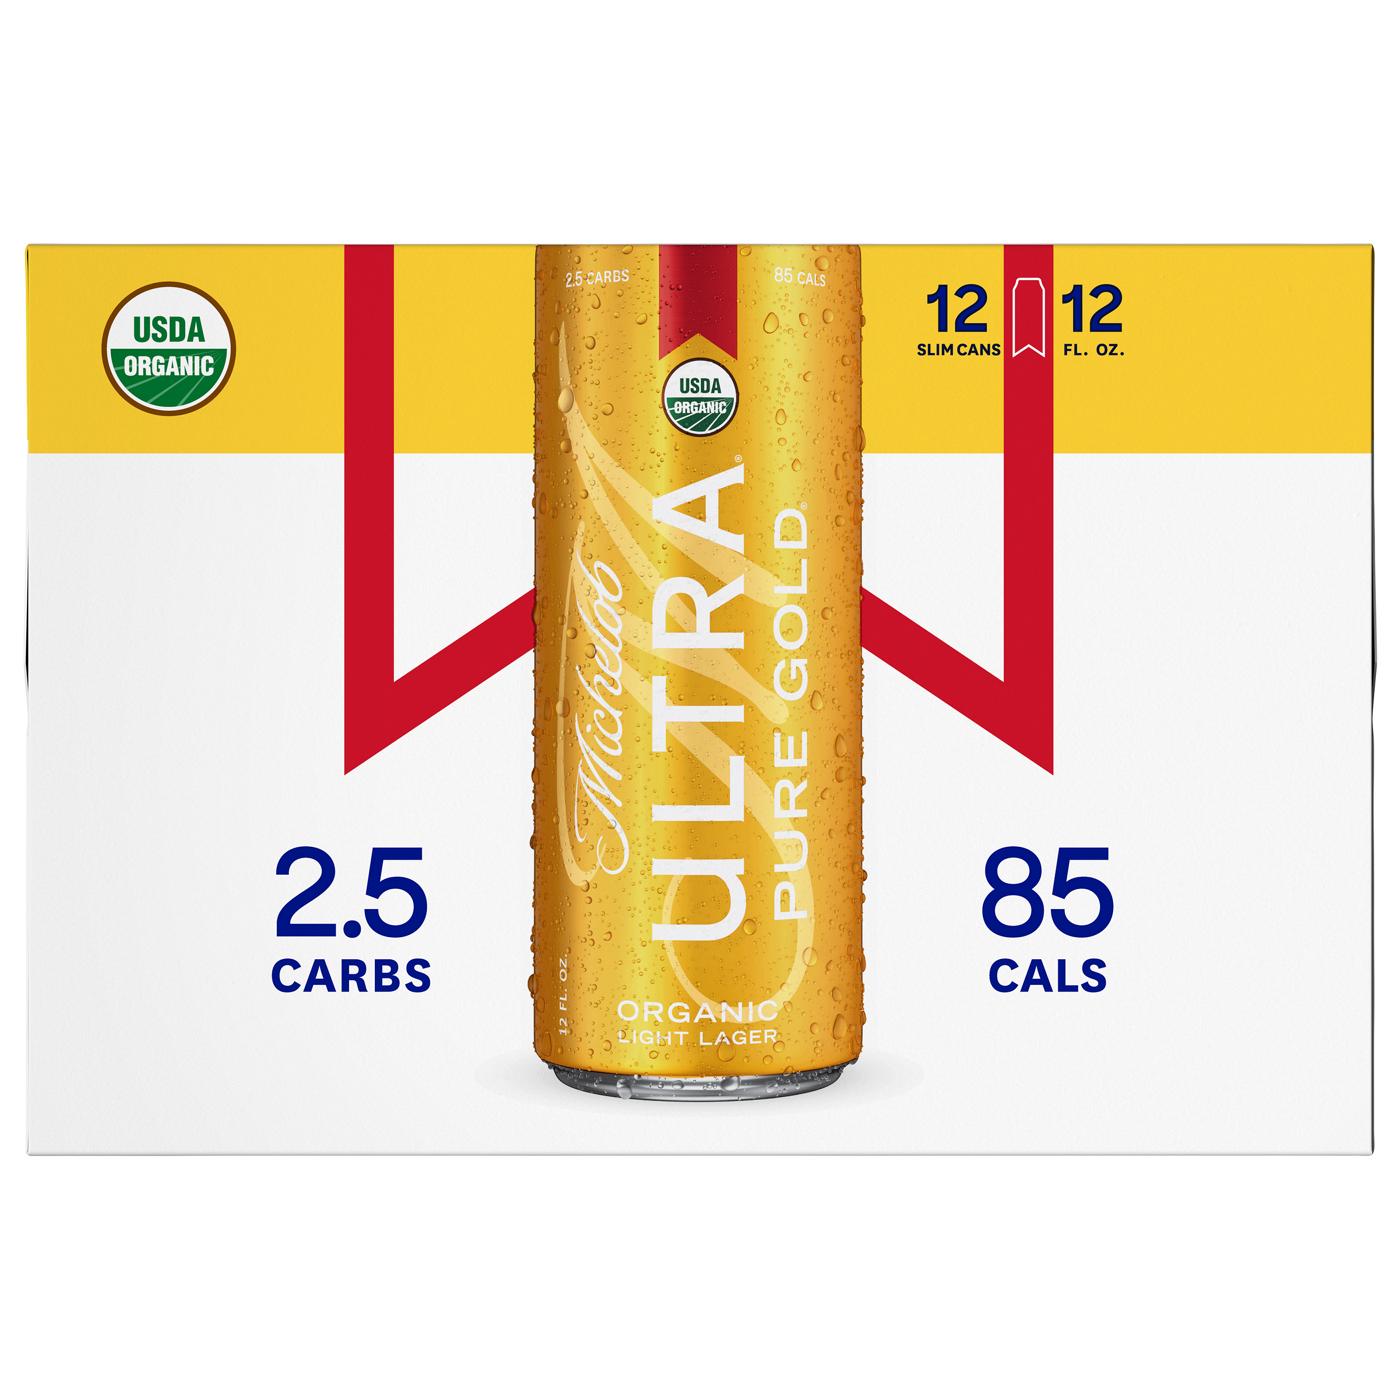 Michelob Ultra Pure Gold Lager Beer 12 oz Slim Cans; image 2 of 2